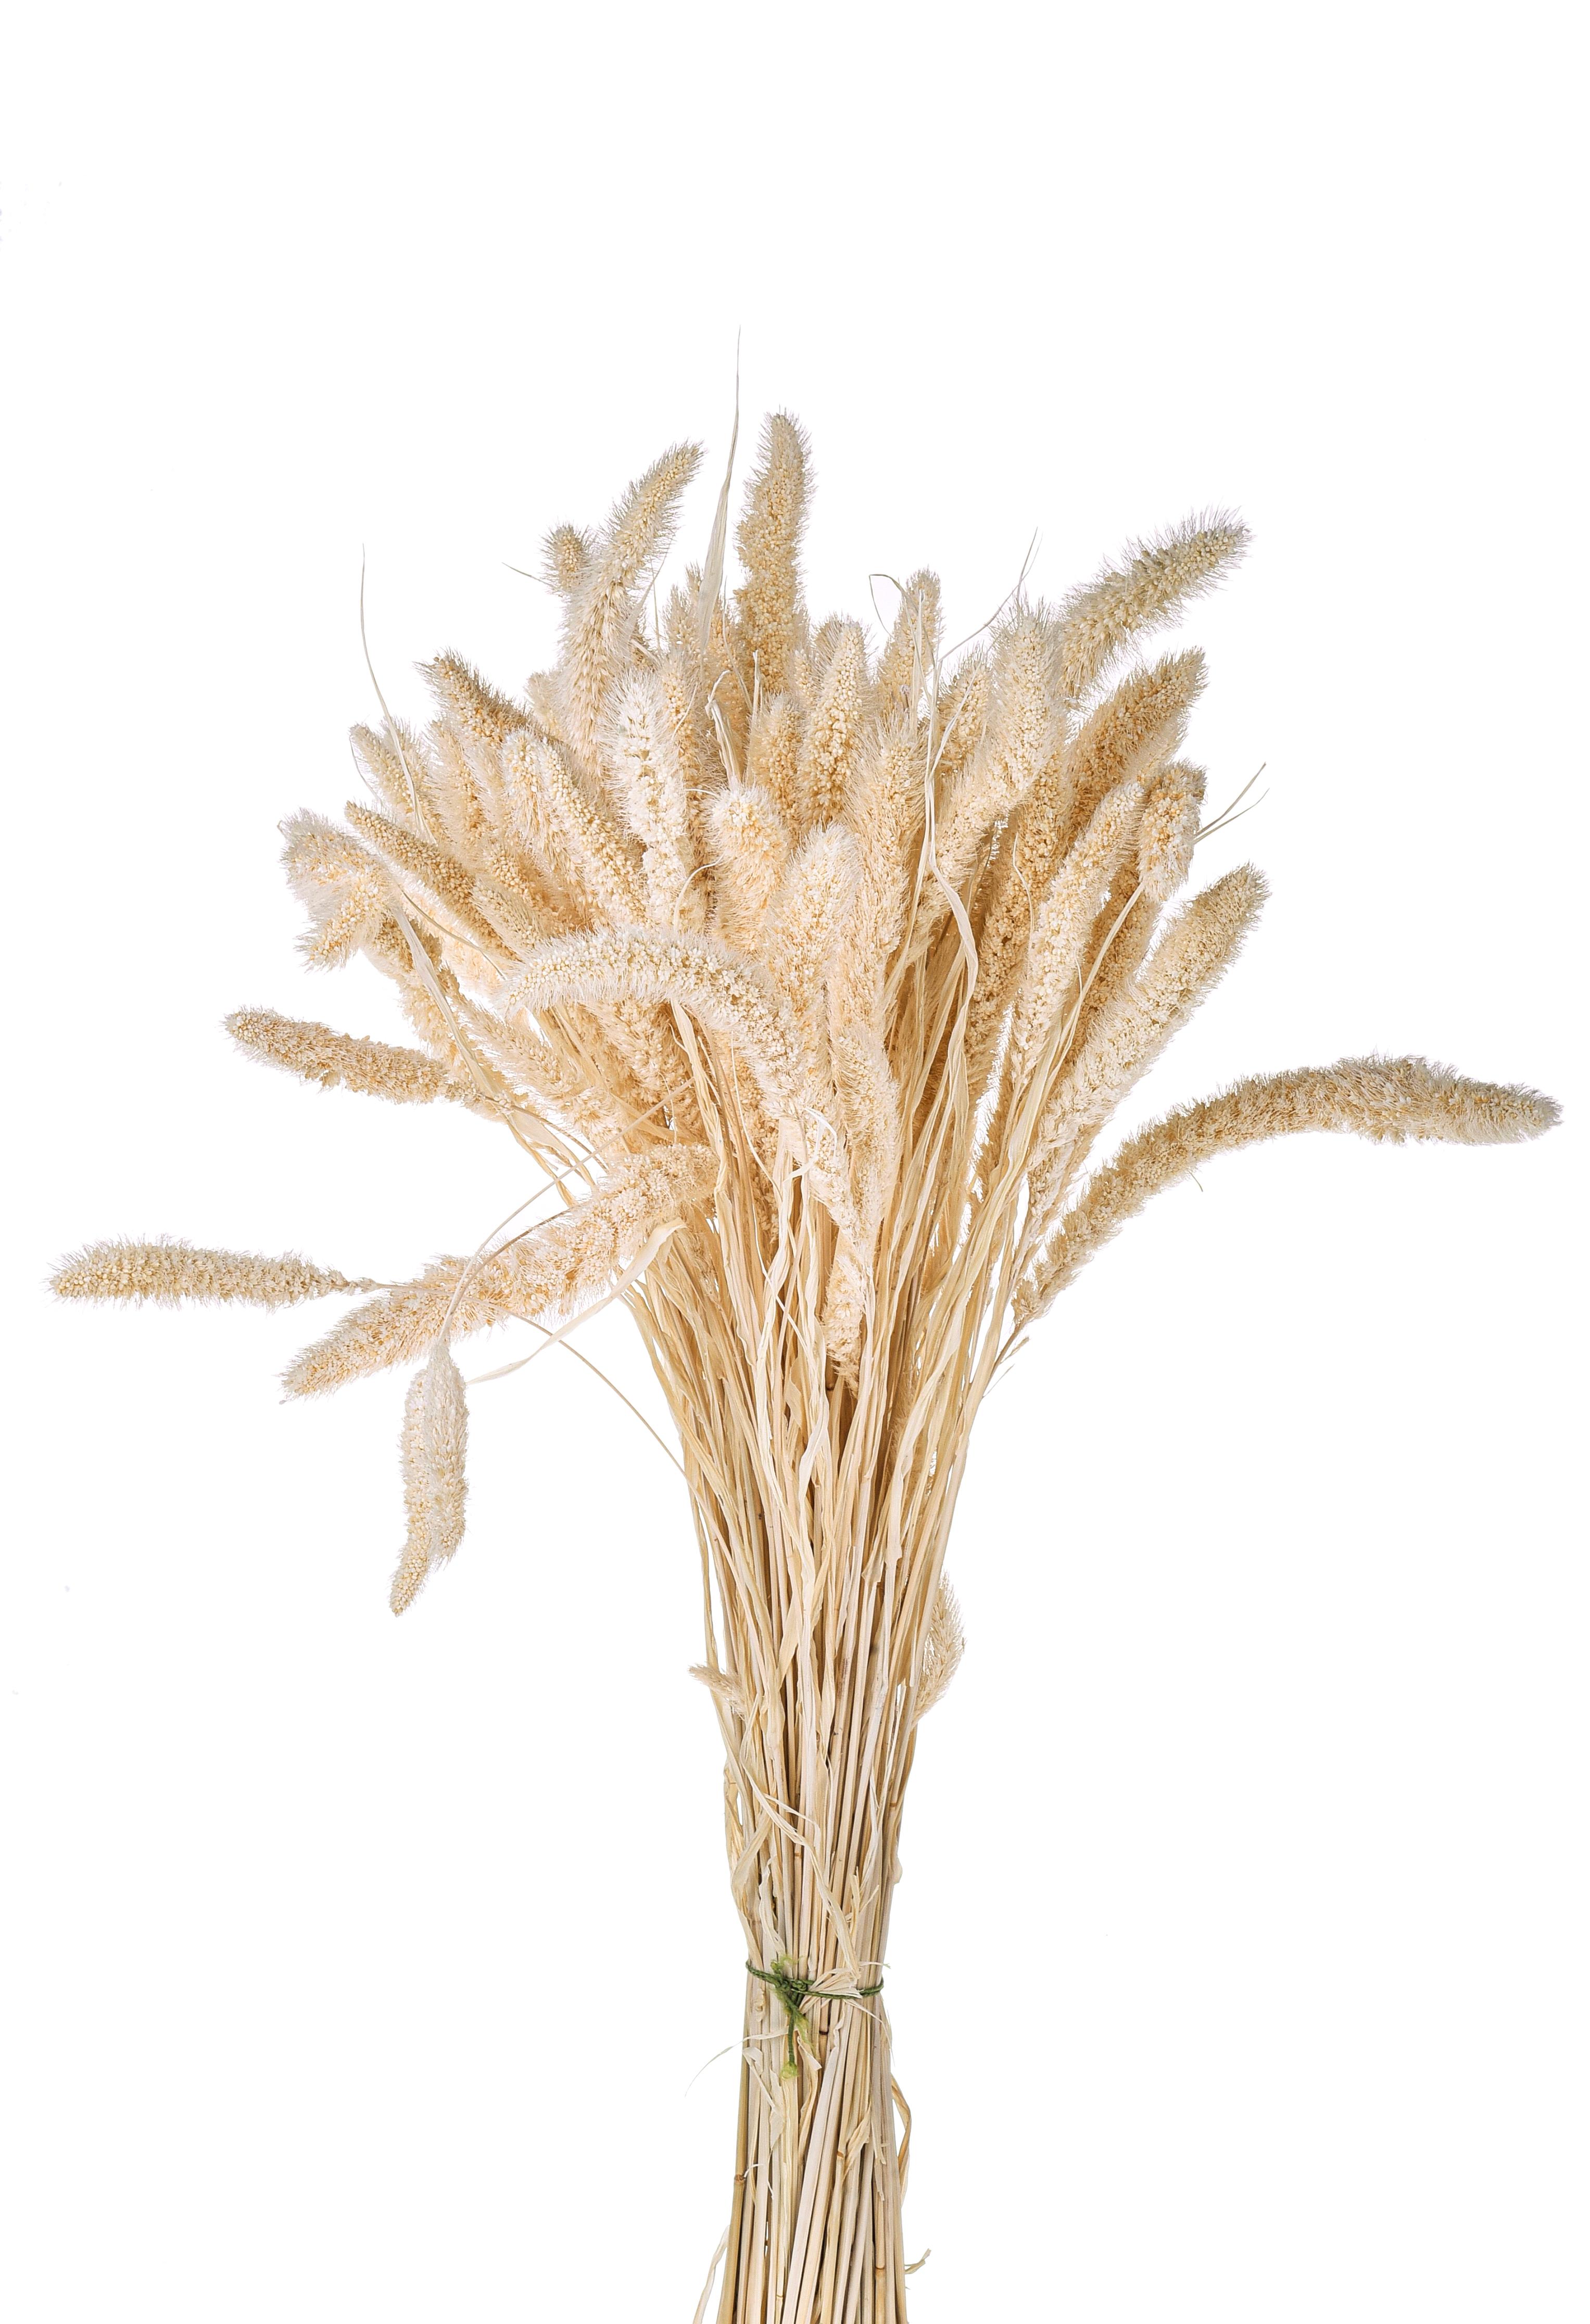 NATURAL PRODUCTS DRIED FLOWERS AND ERBS,SETARIA VERTICILLATA SBIANCATA